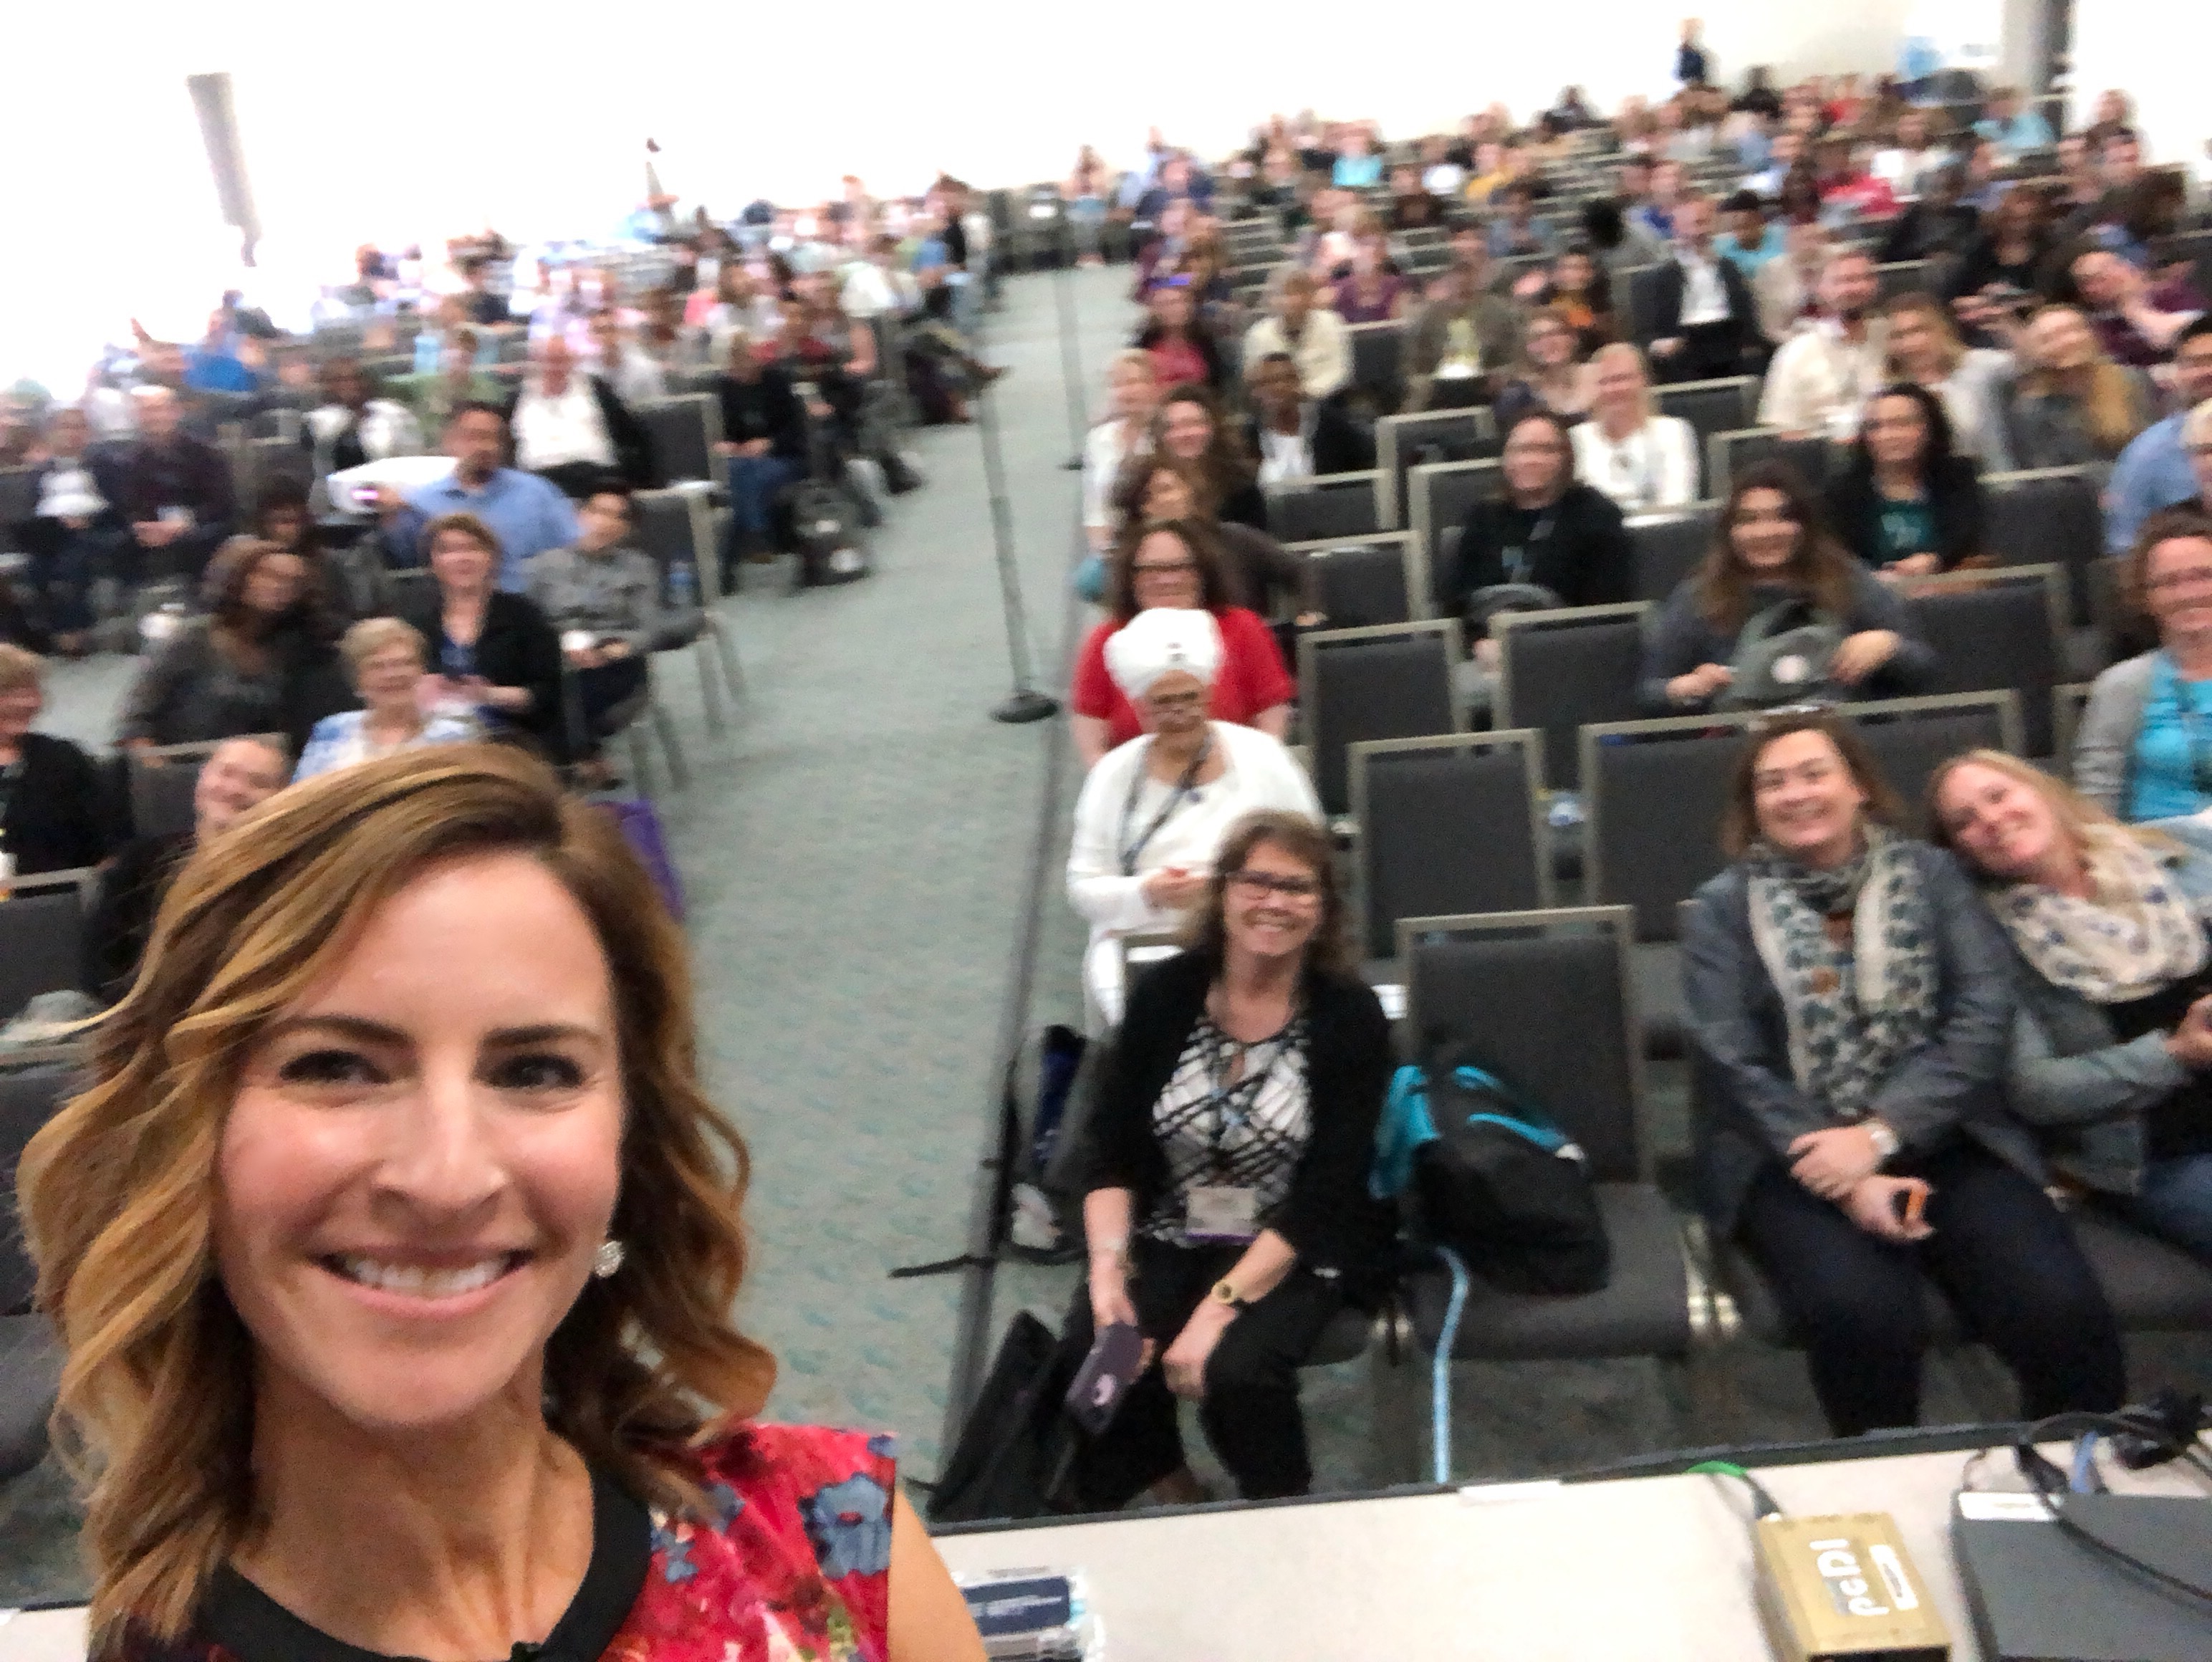 Janine selfie on stage at ATD 2018